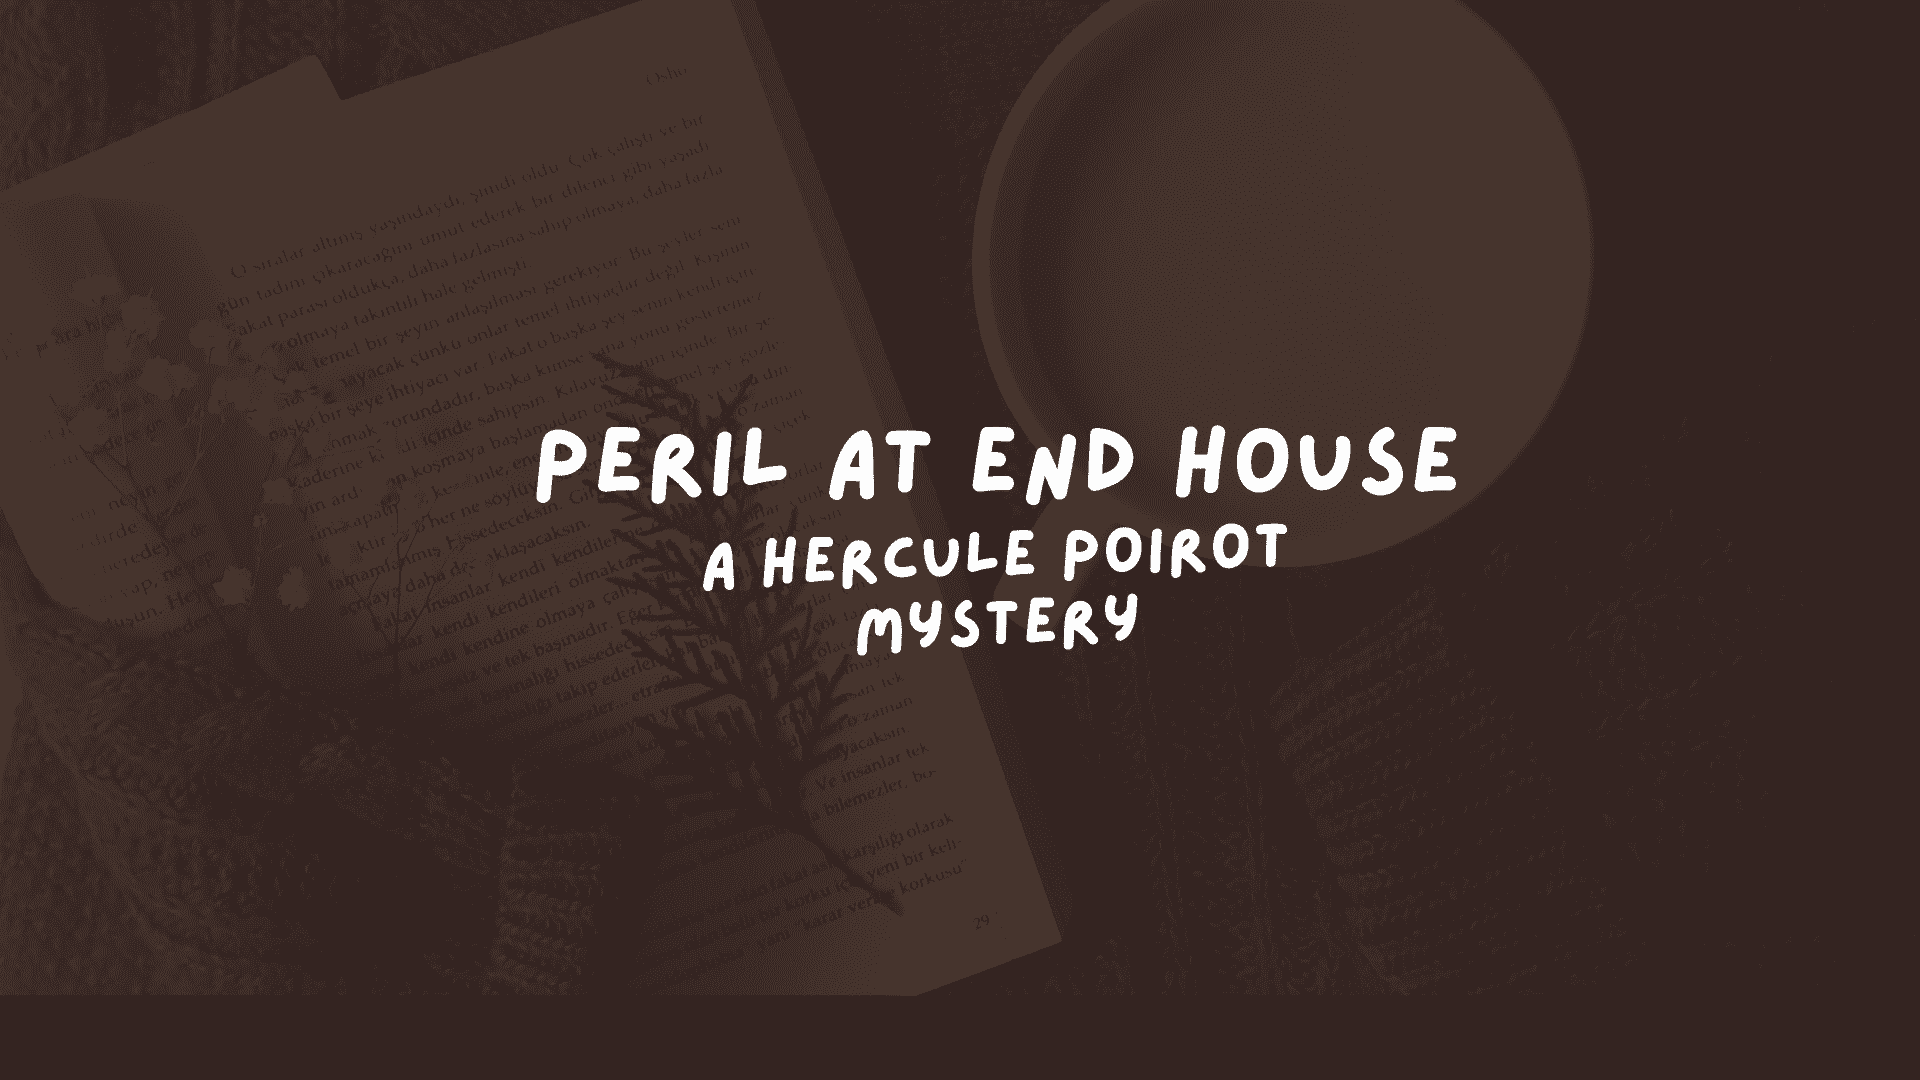 The Peril at End House novel cover image